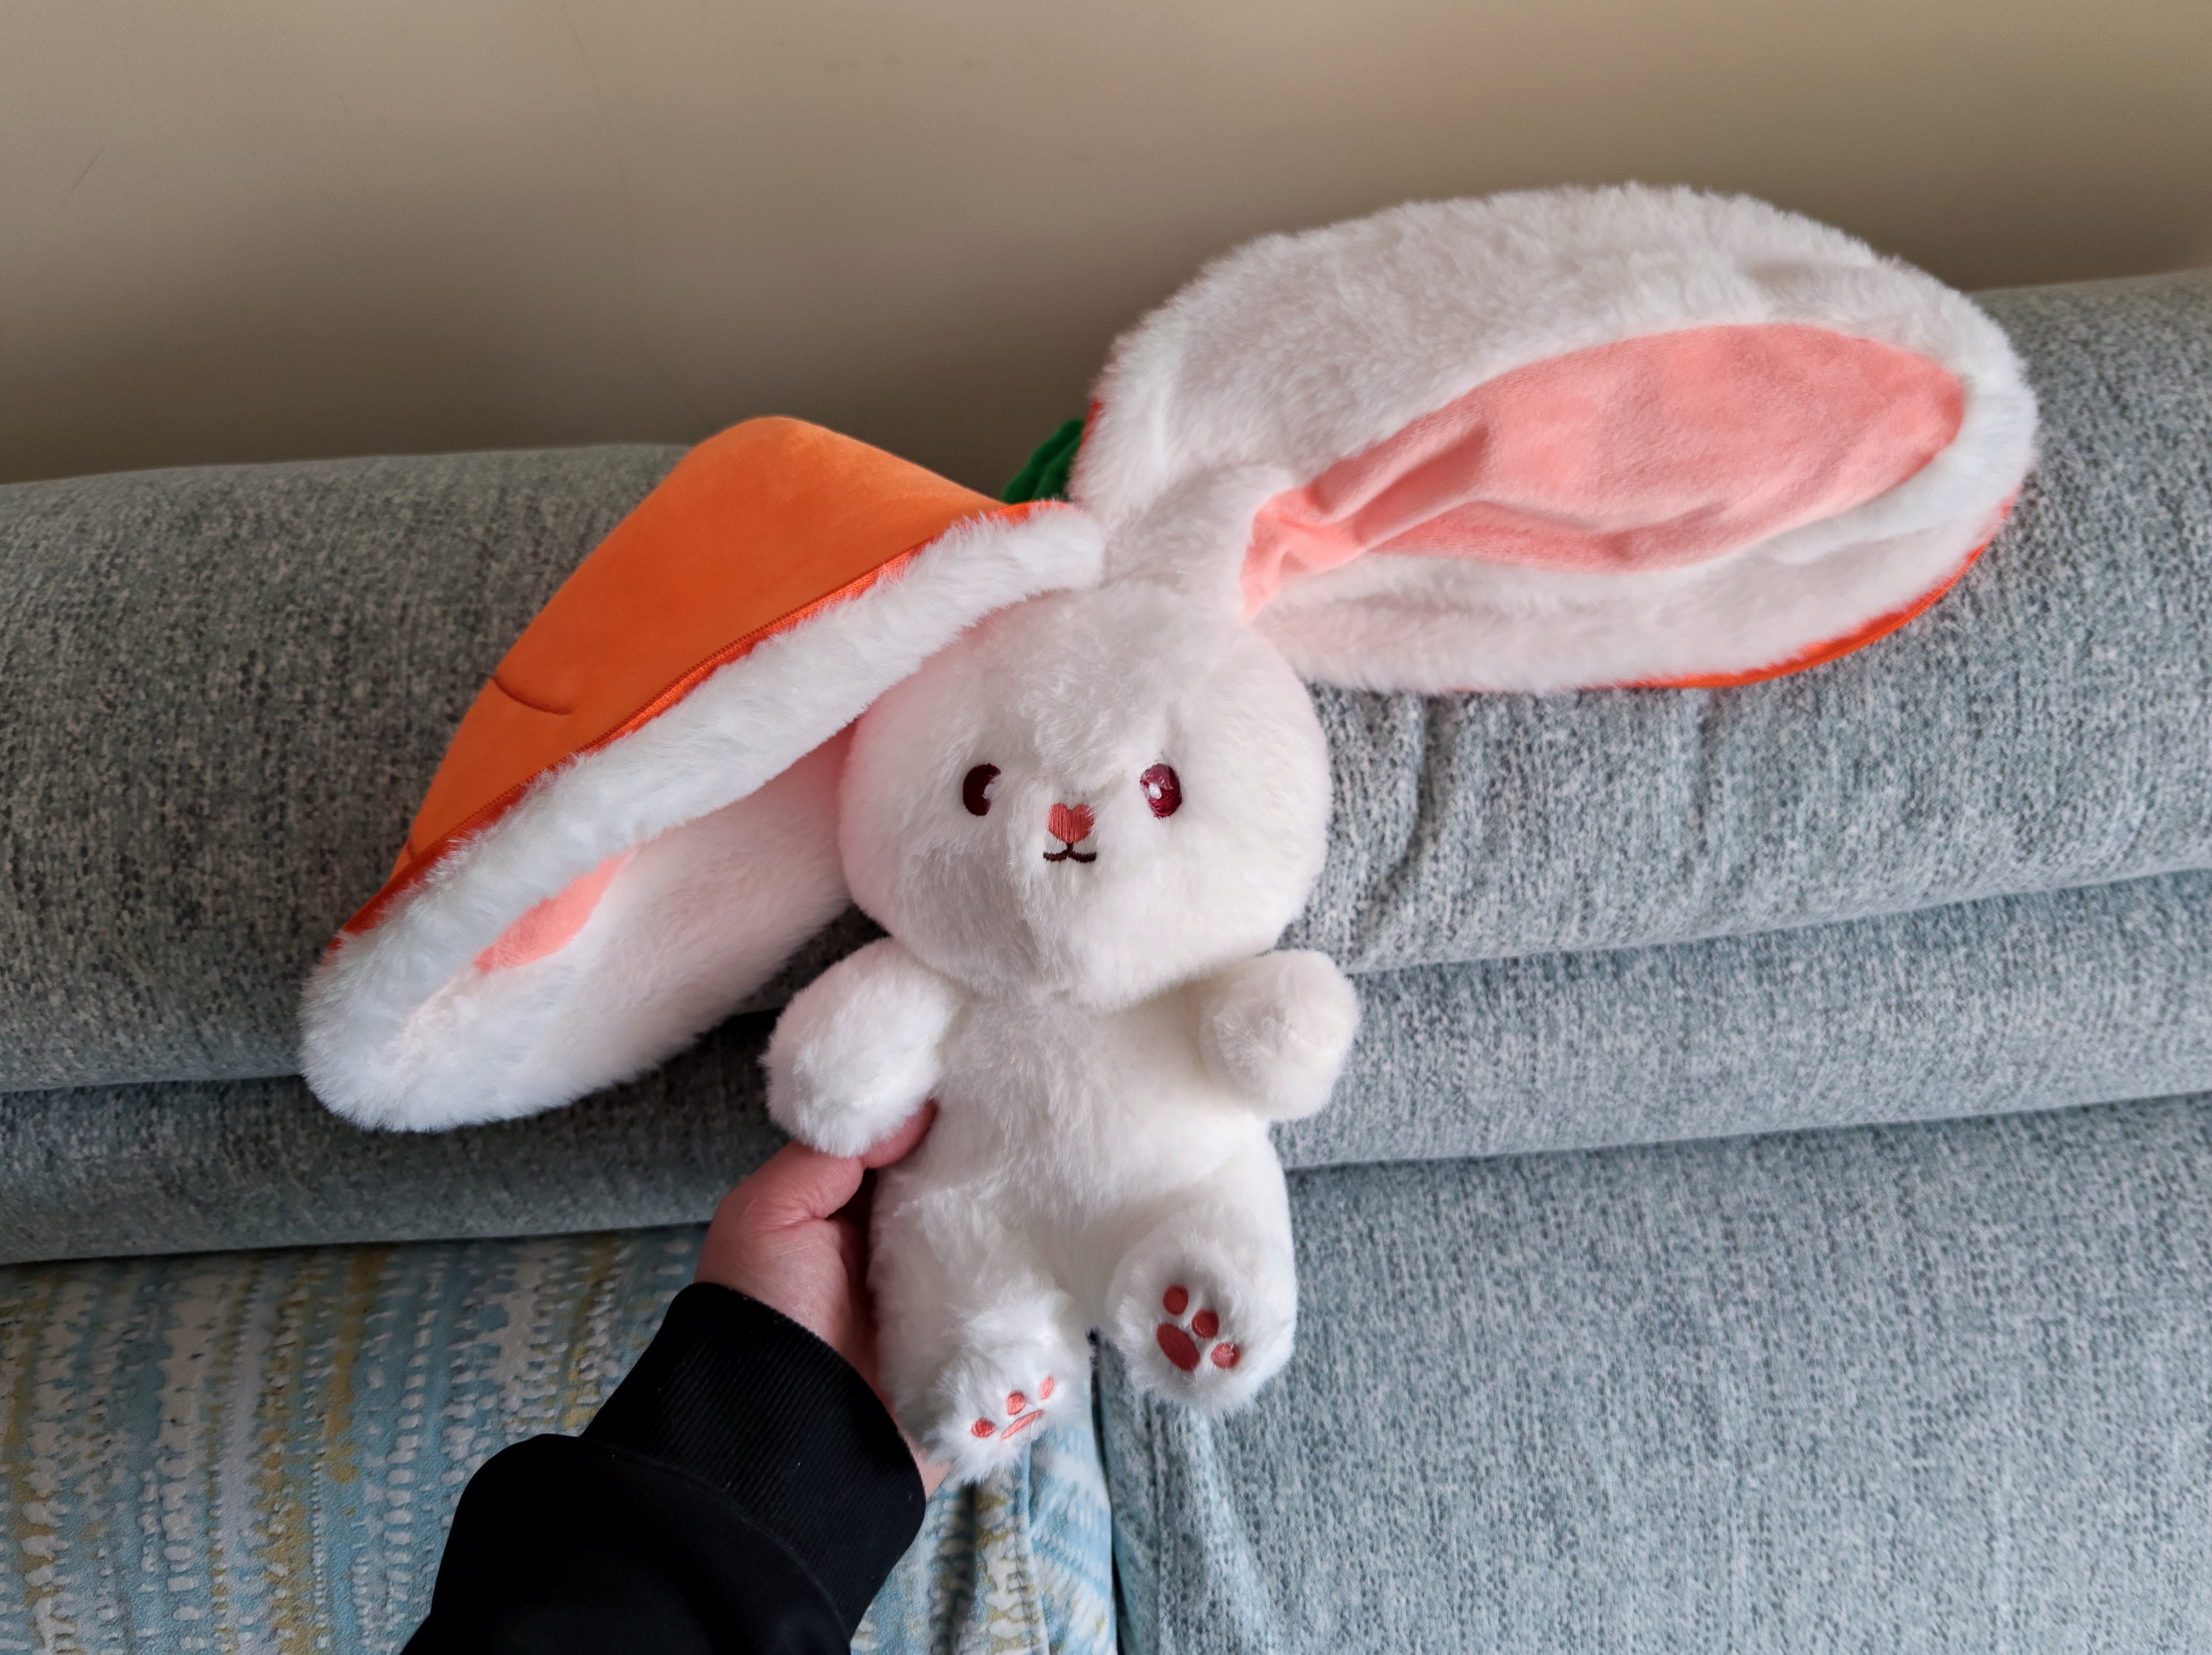 Bunny Plush Toy - Pull Ears to Transform from Carrot or Strawberry into  Rabbit